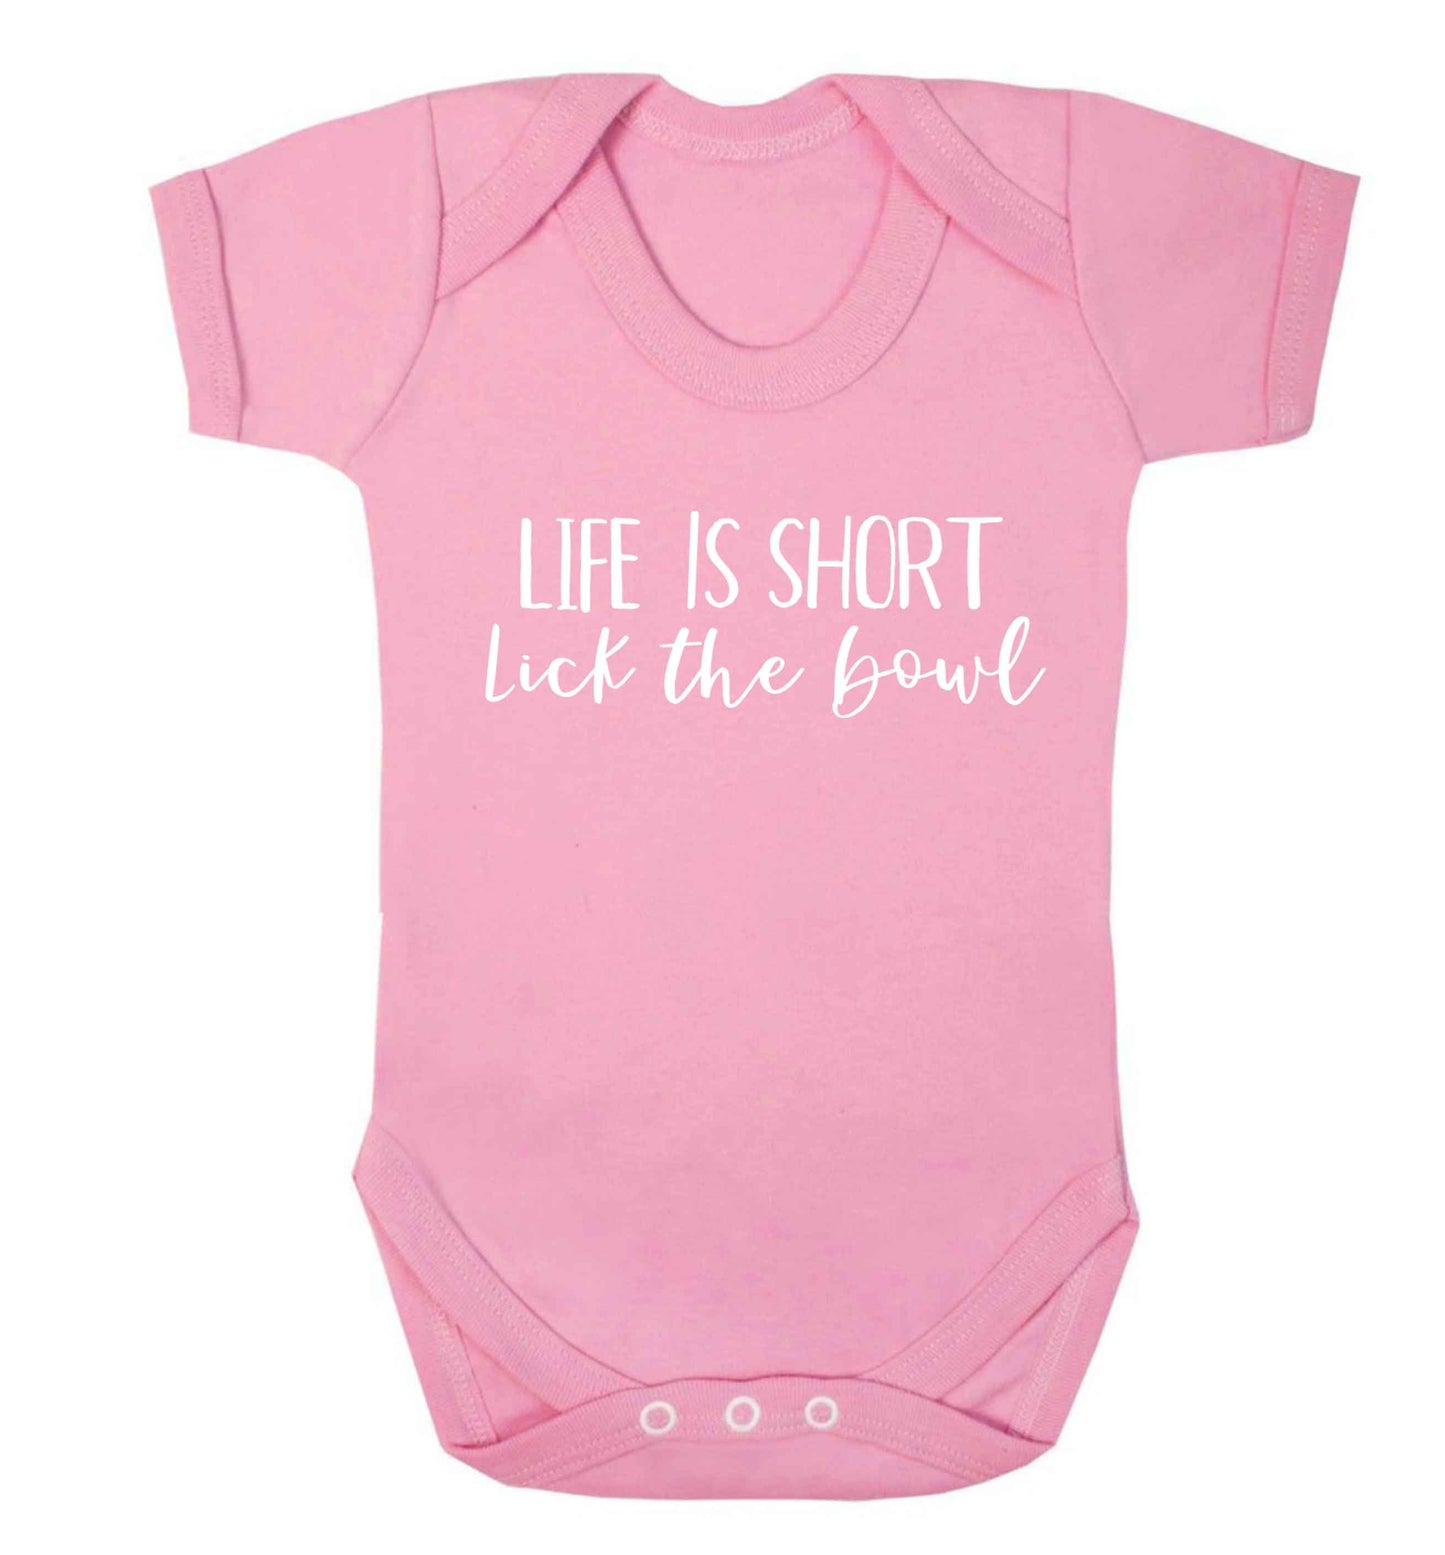 Life is short lick the bowl Baby Vest pale pink 18-24 months